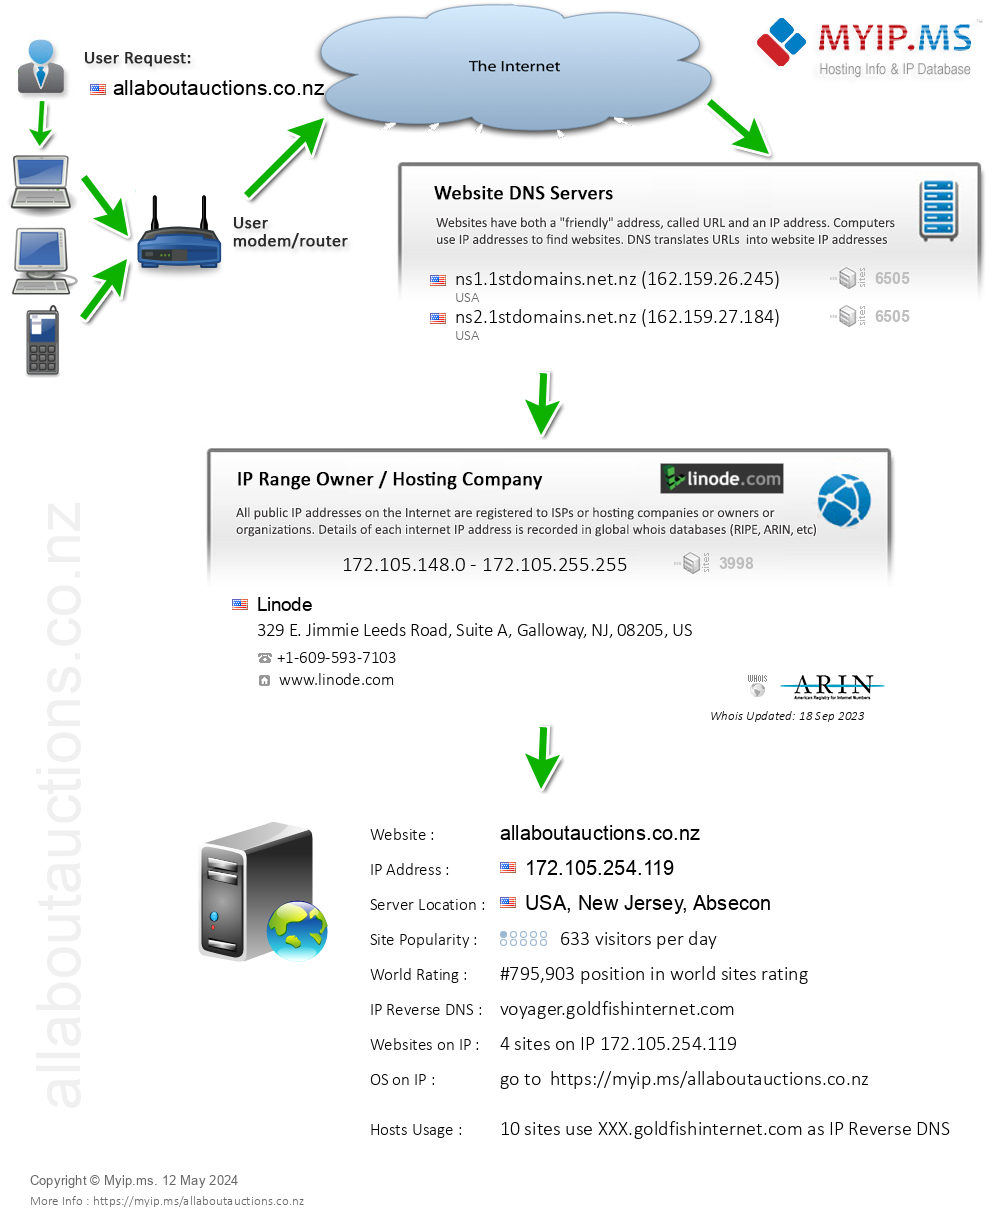 Allaboutauctions.co.nz - Website Hosting Visual IP Diagram